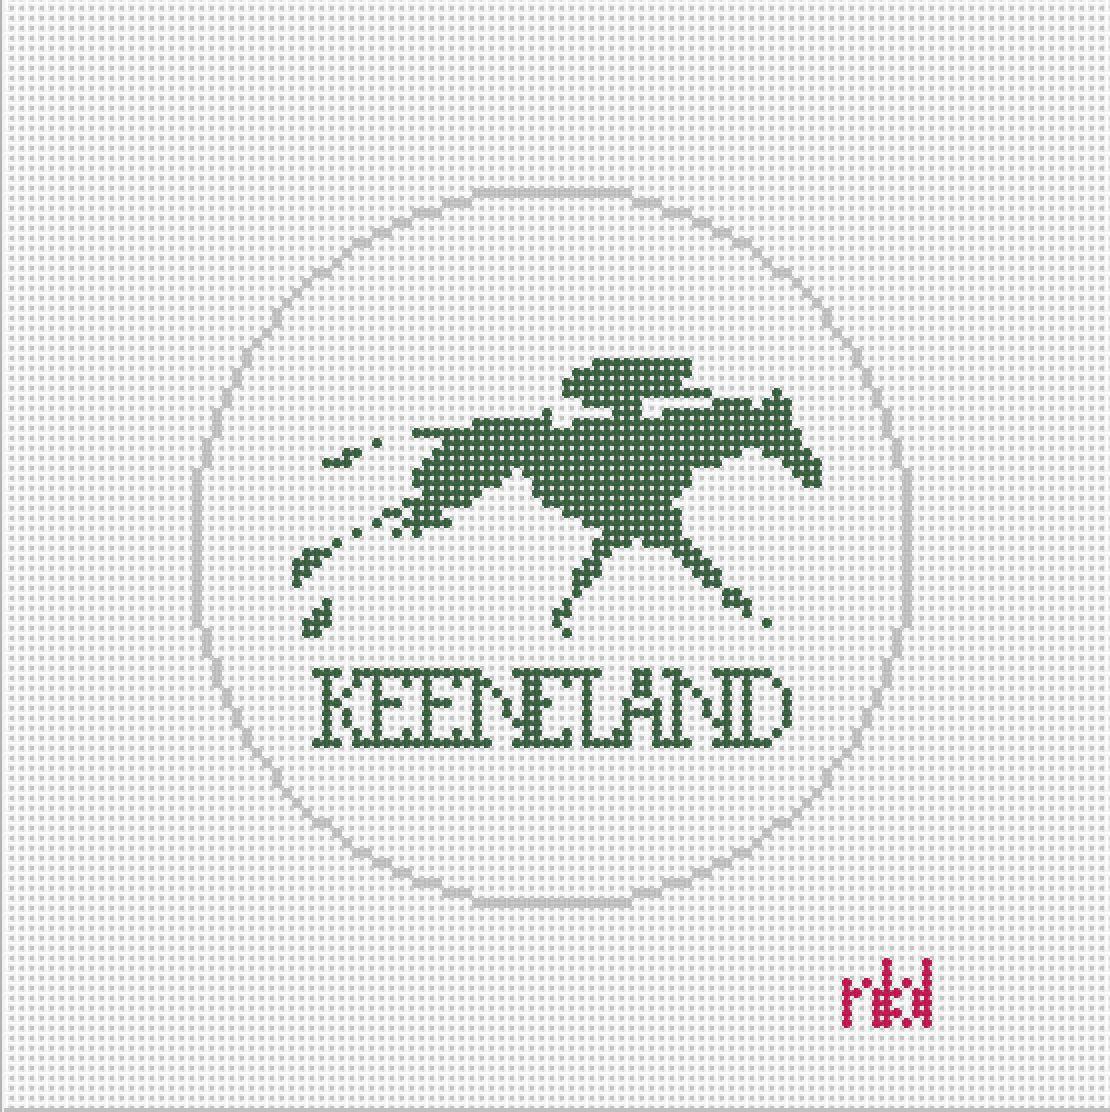 Keeneland ornament - Needlepoint by Laura